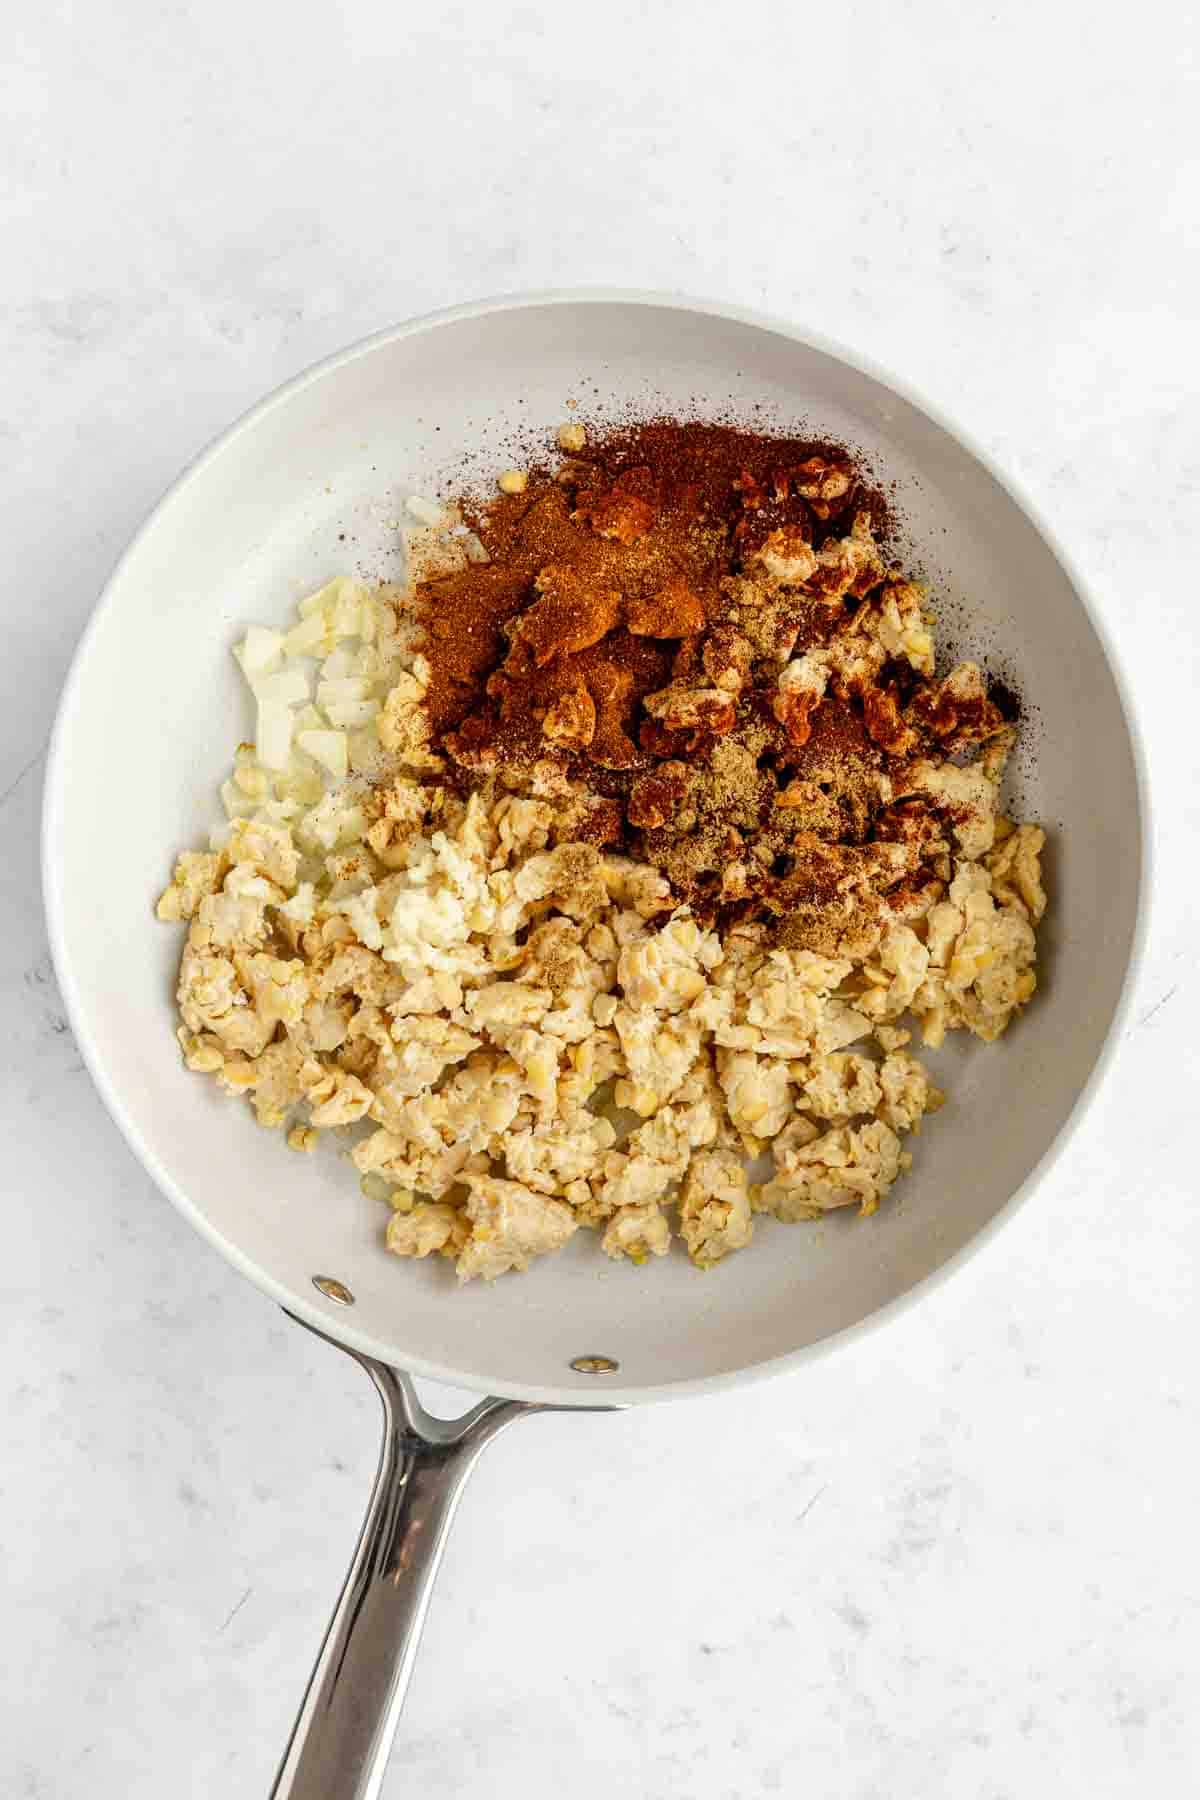 crumbled tempeh, diced onion, and spices in a ceramic frying pan